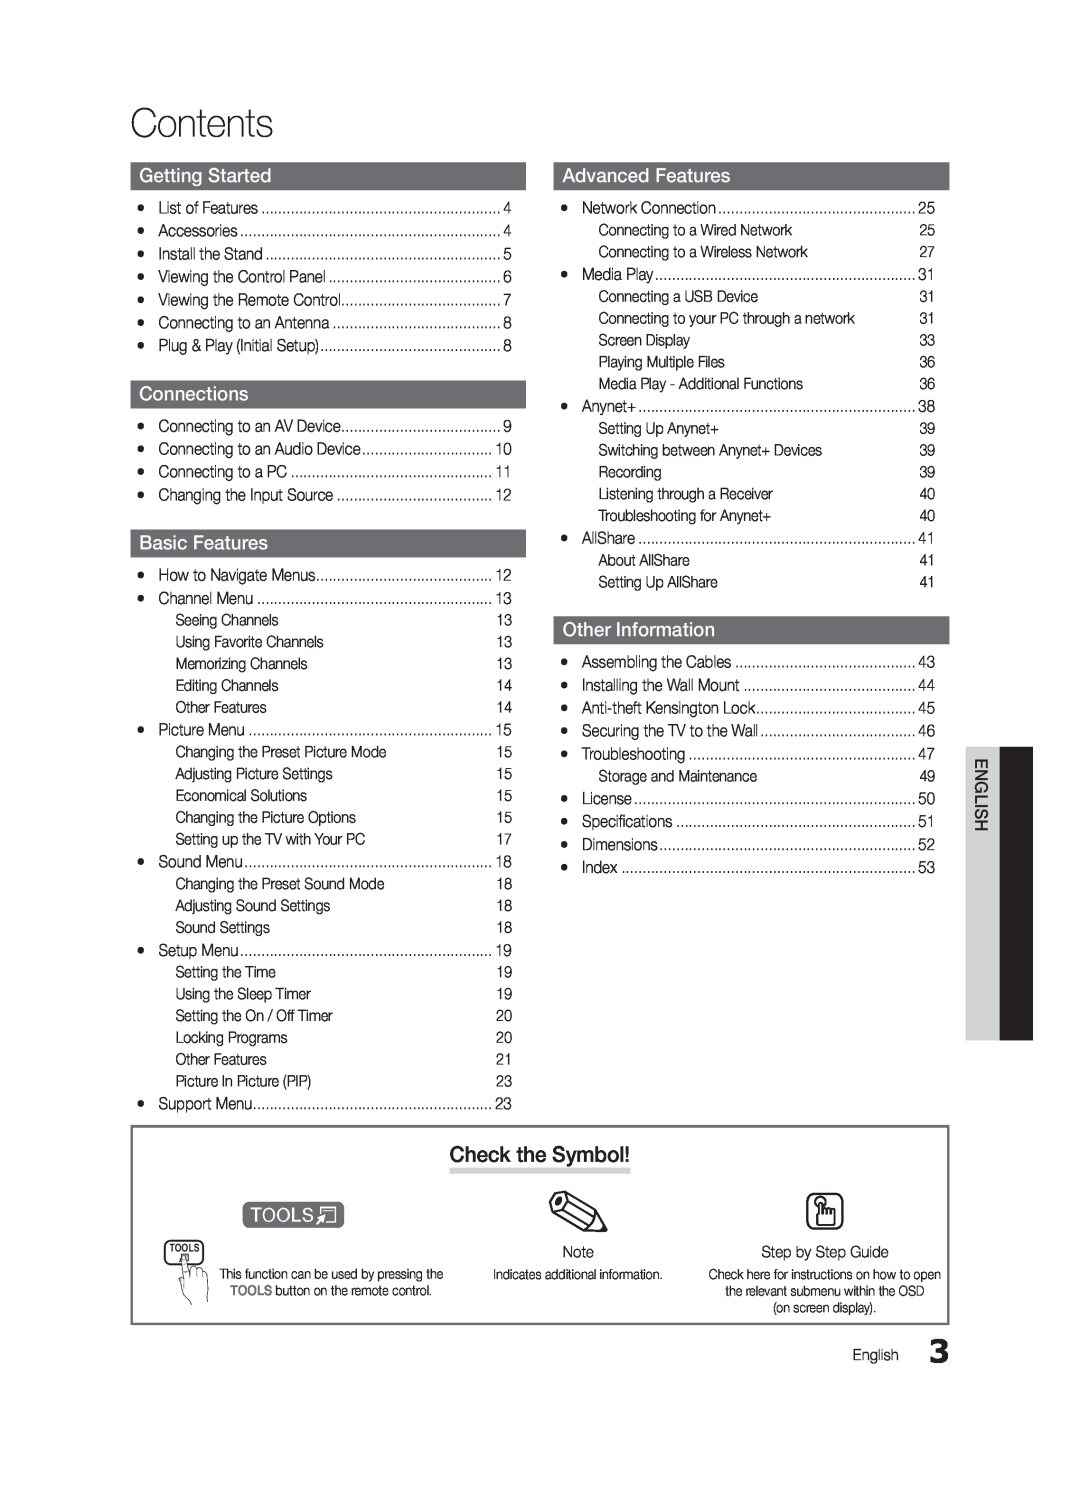 Samsung UC6300-ZC user manual Contents, Check the Symbol, Getting Started, Connections, Advanced Features, Basic Features 